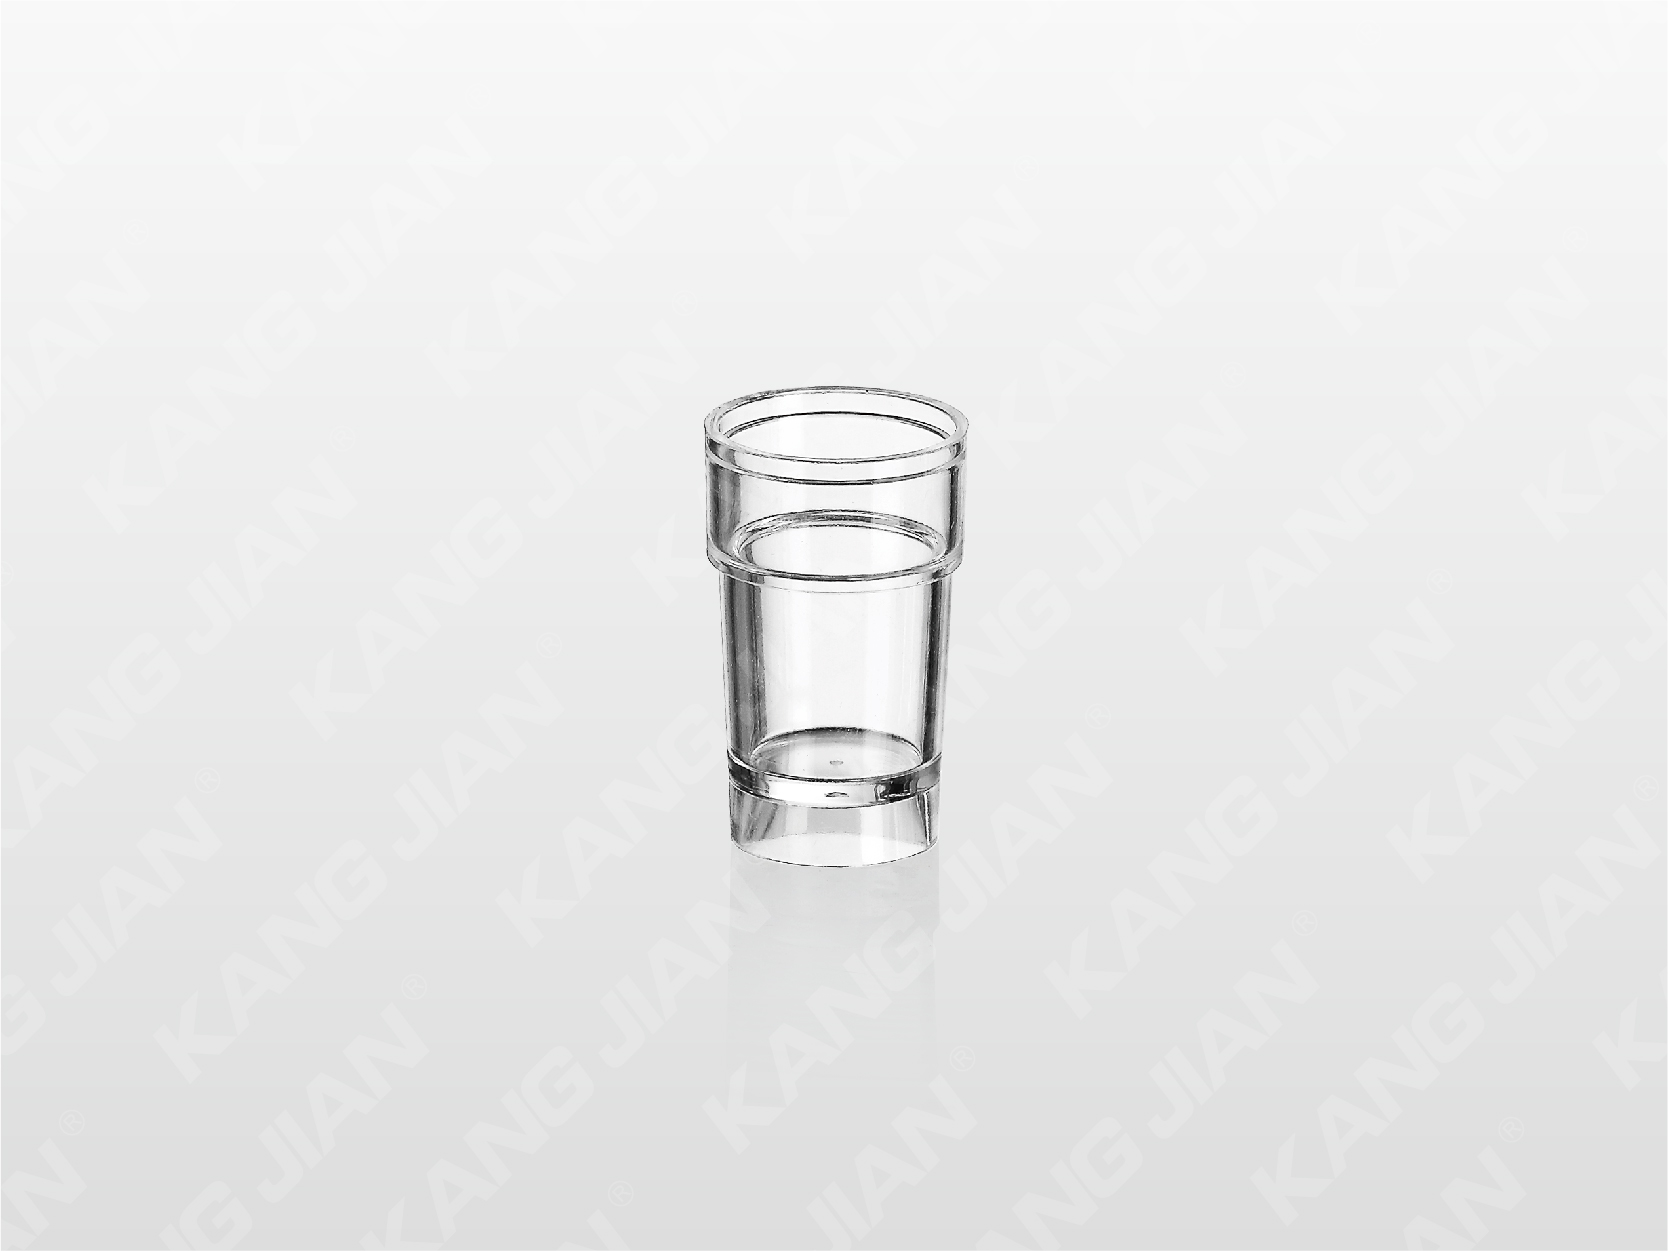 Sample Cup